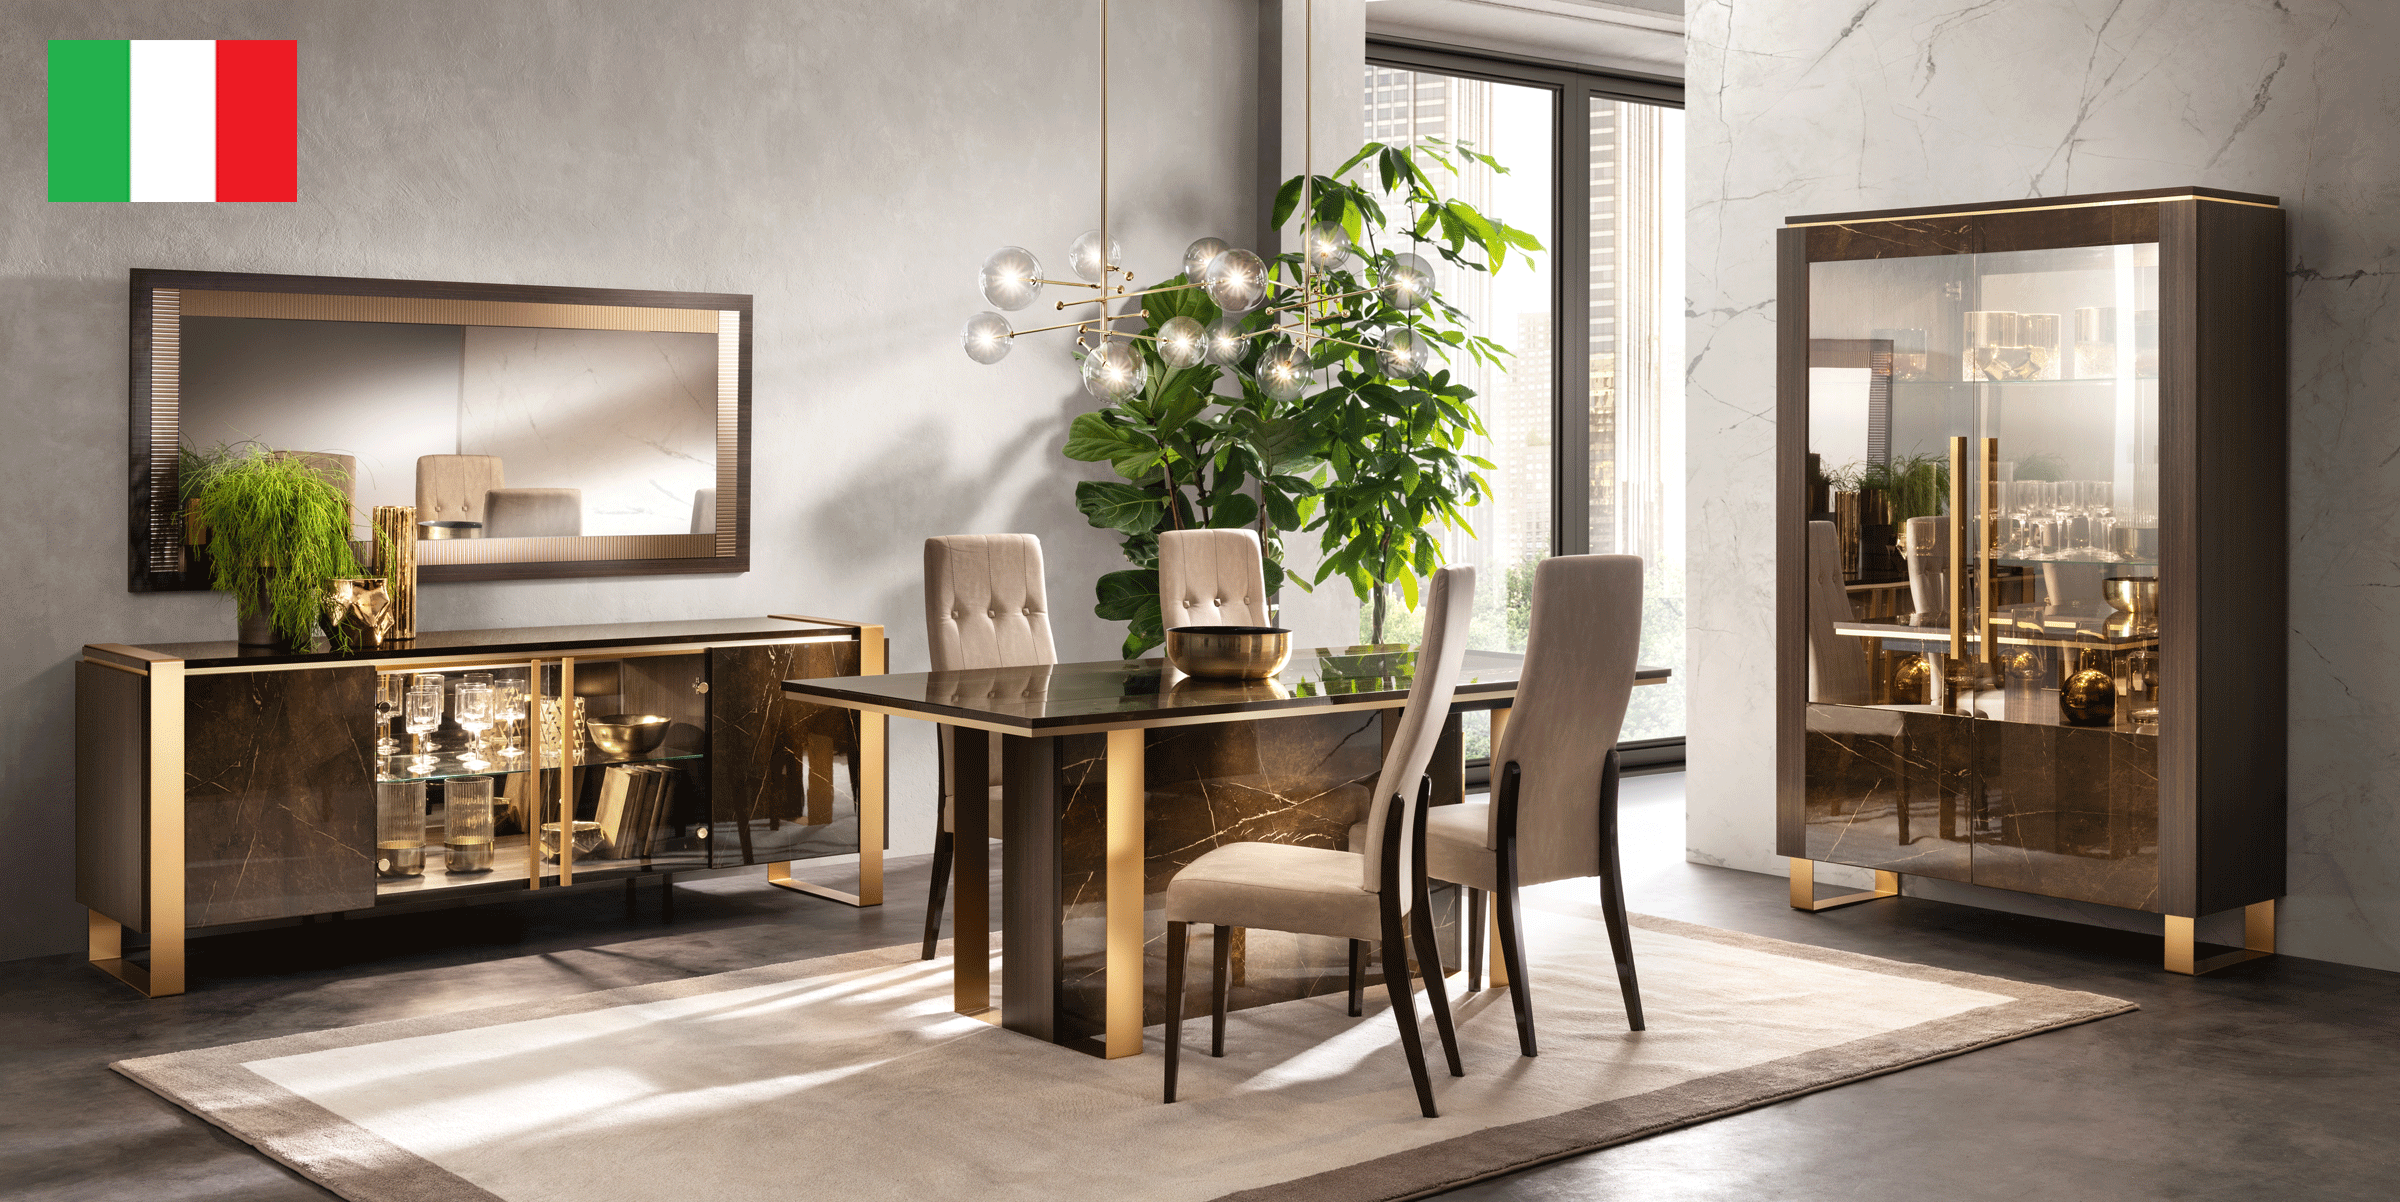 Dining Room Furniture Chairs Essenza Dining by Arredoclassic, Italy